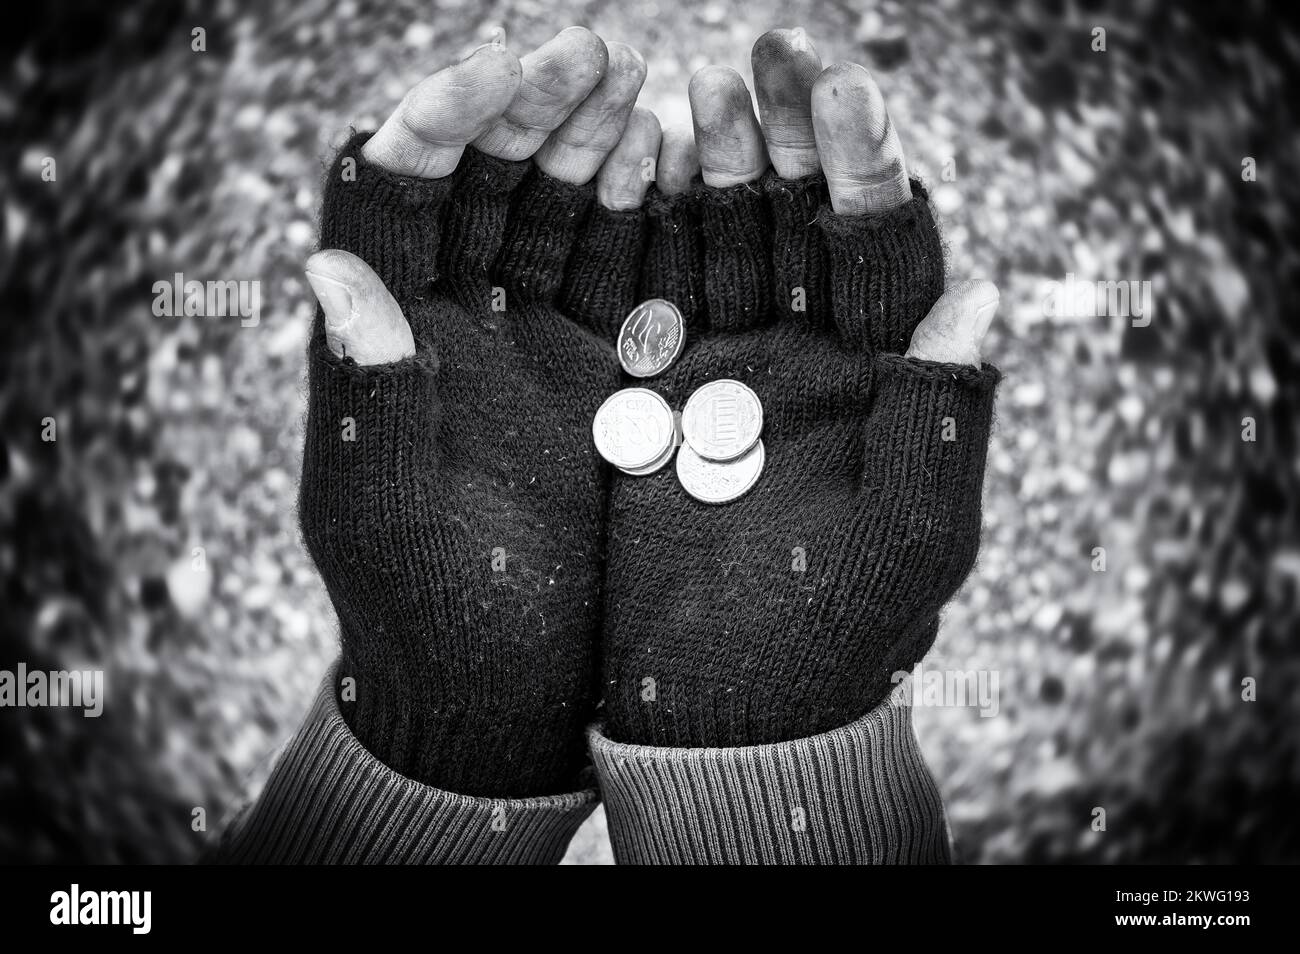 Begging hands with small change as a symbol of poverty and suffering Stock Photo